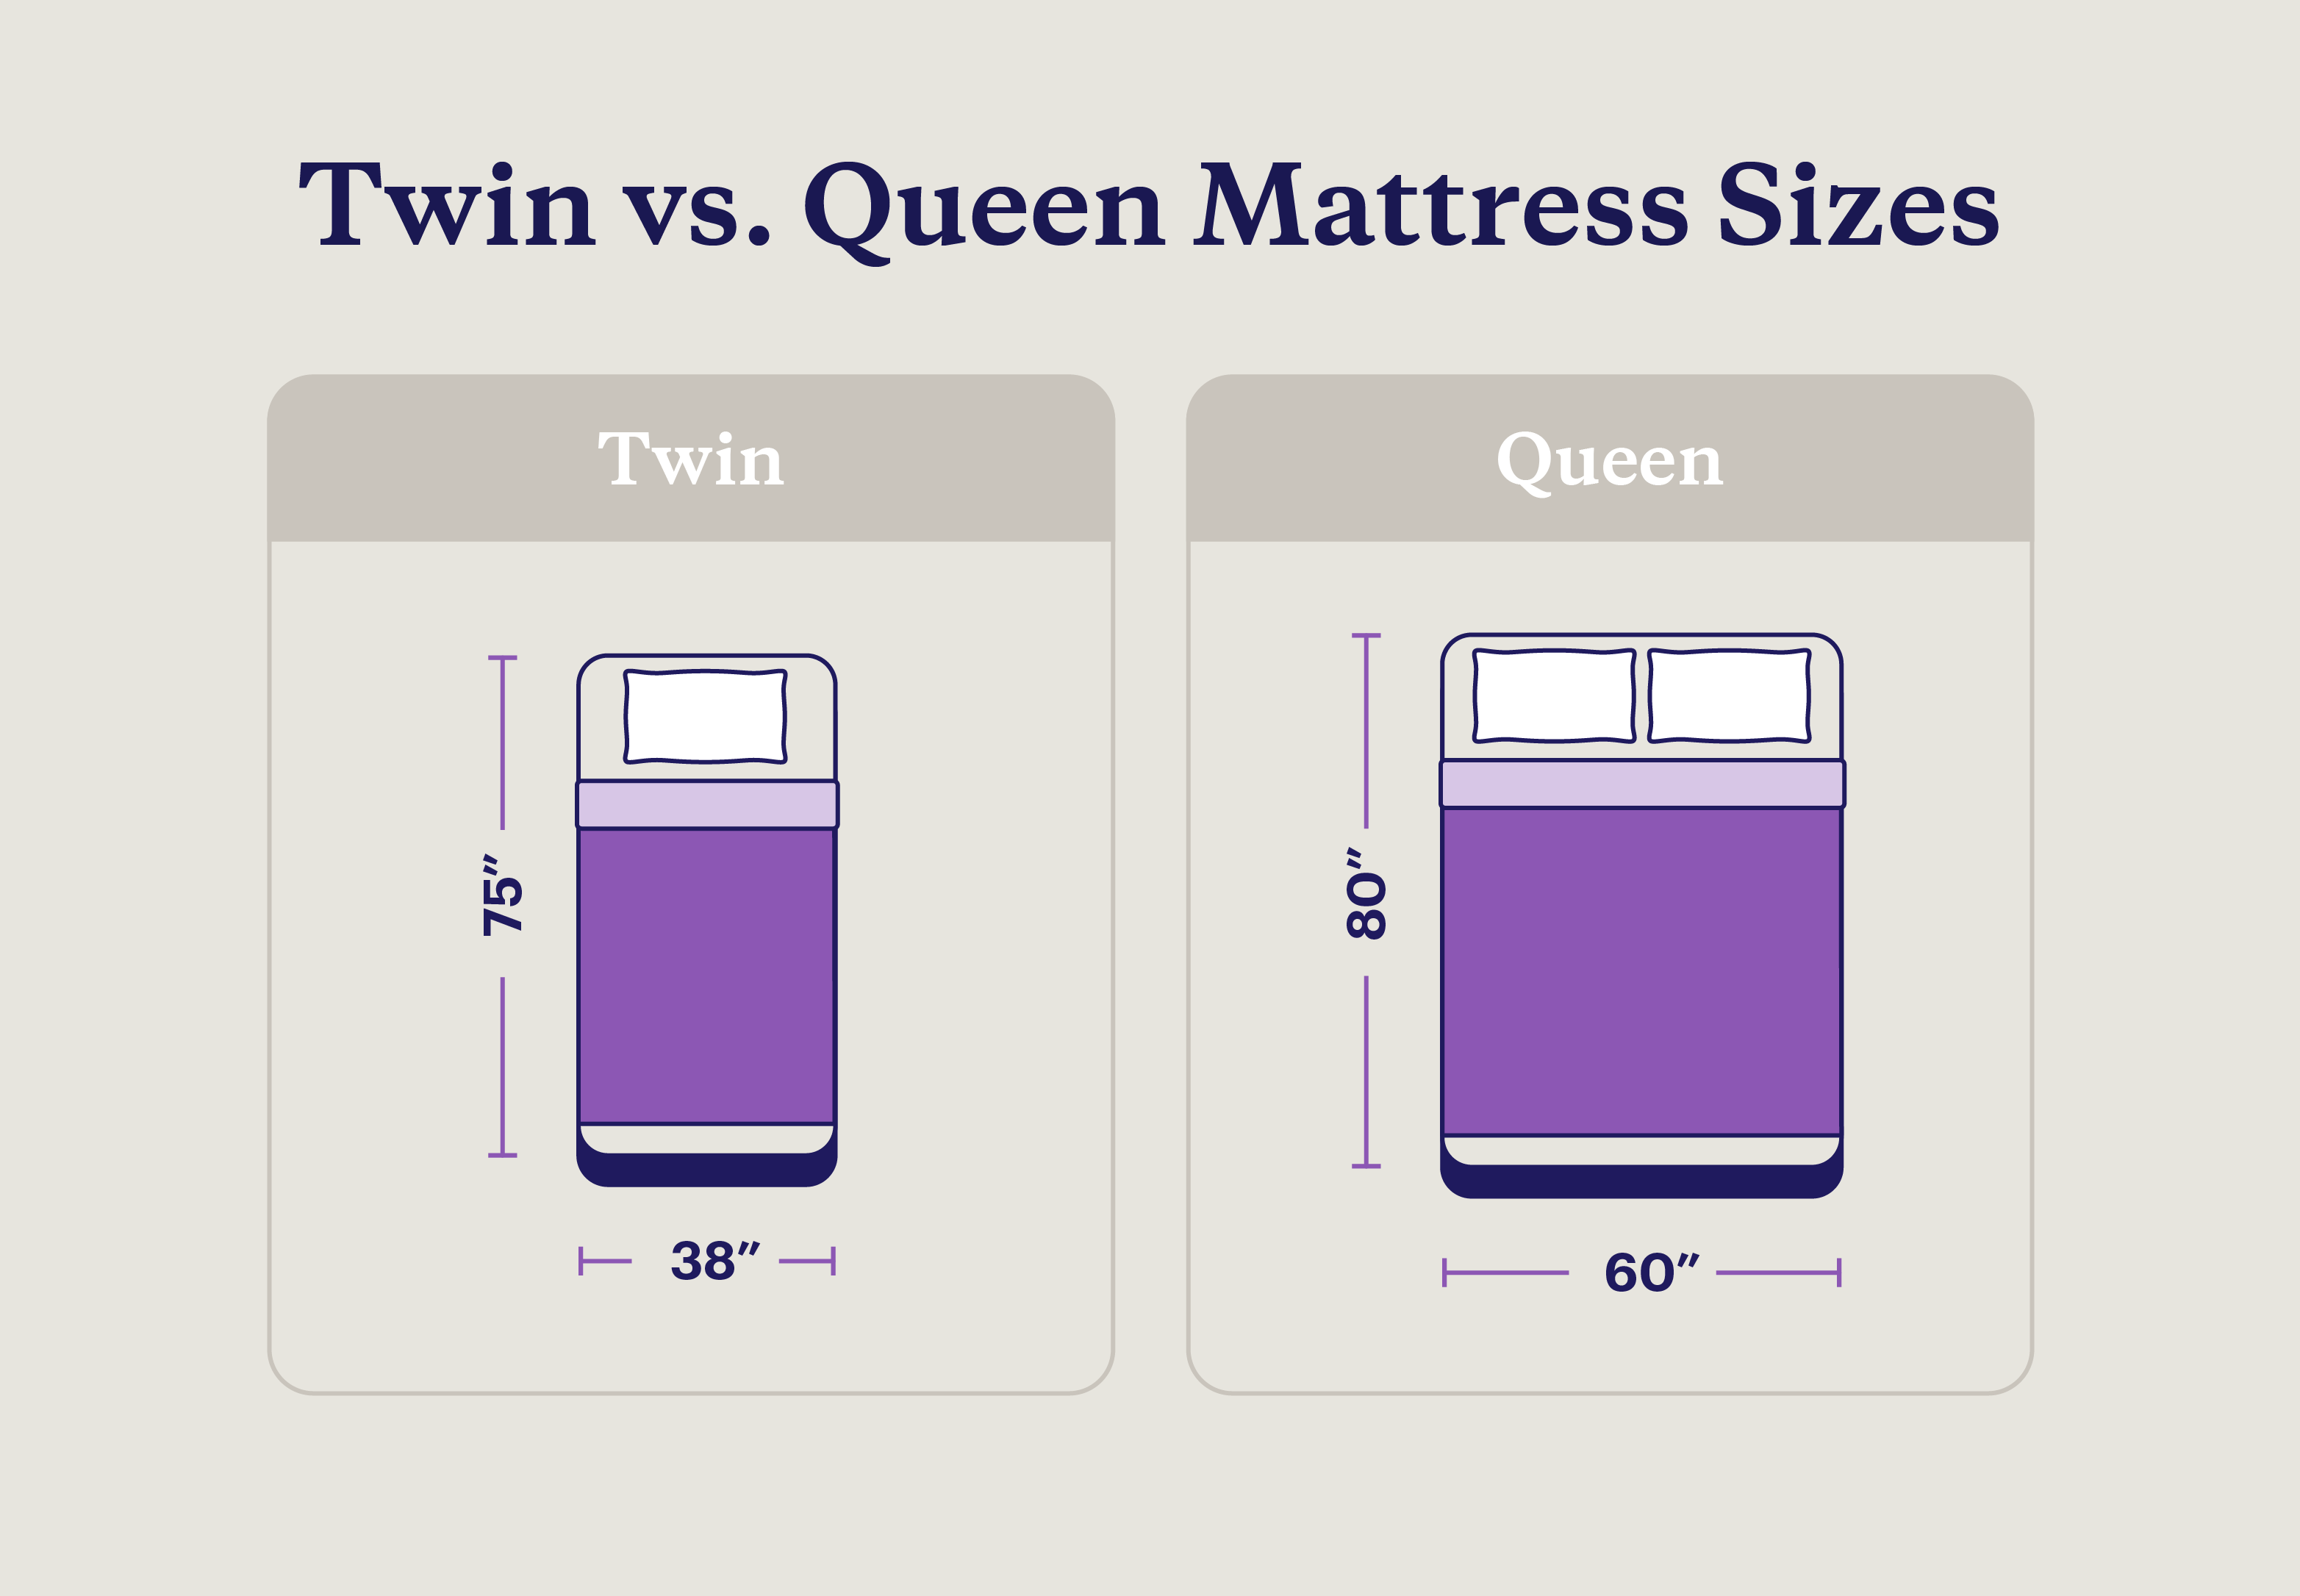 Illustration of two mattresses comparing twin vs queen dimensions.